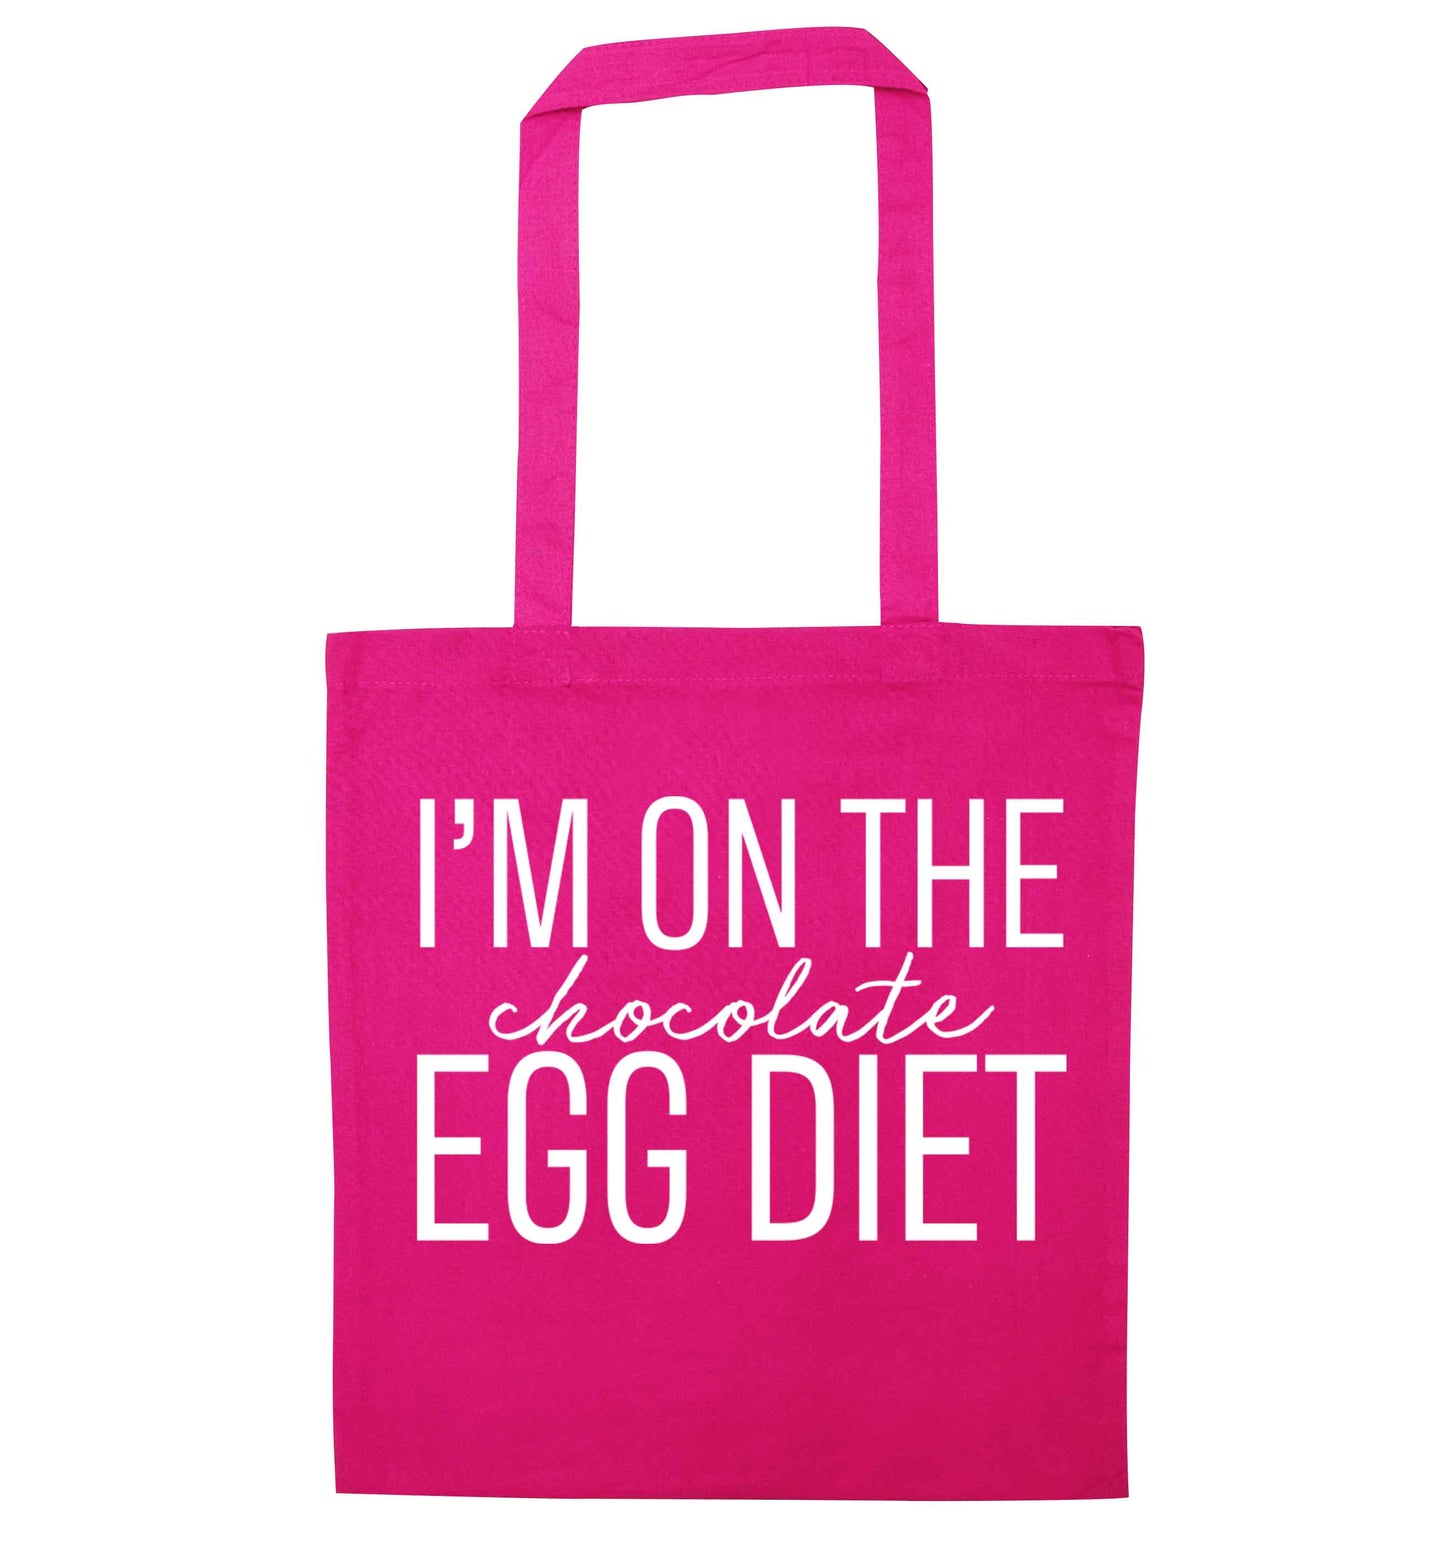 I'm on the chocolate egg diet pink tote bag